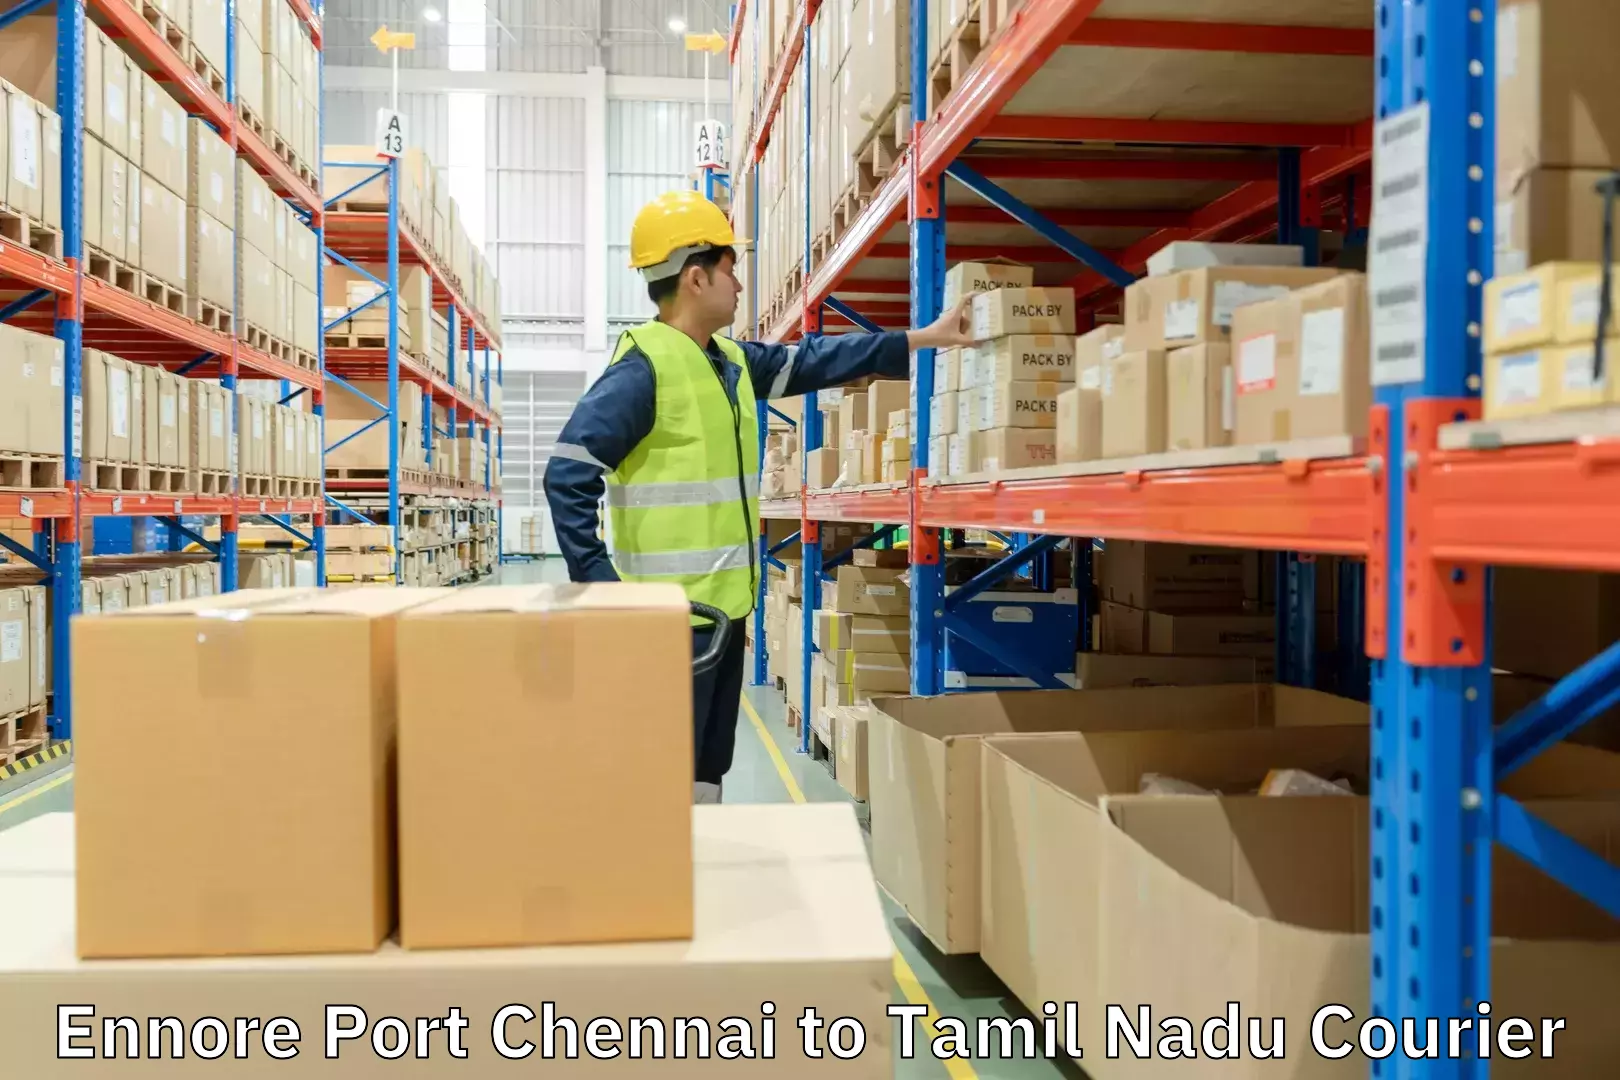 Online courier booking Ennore Port Chennai to Tamil Nadu